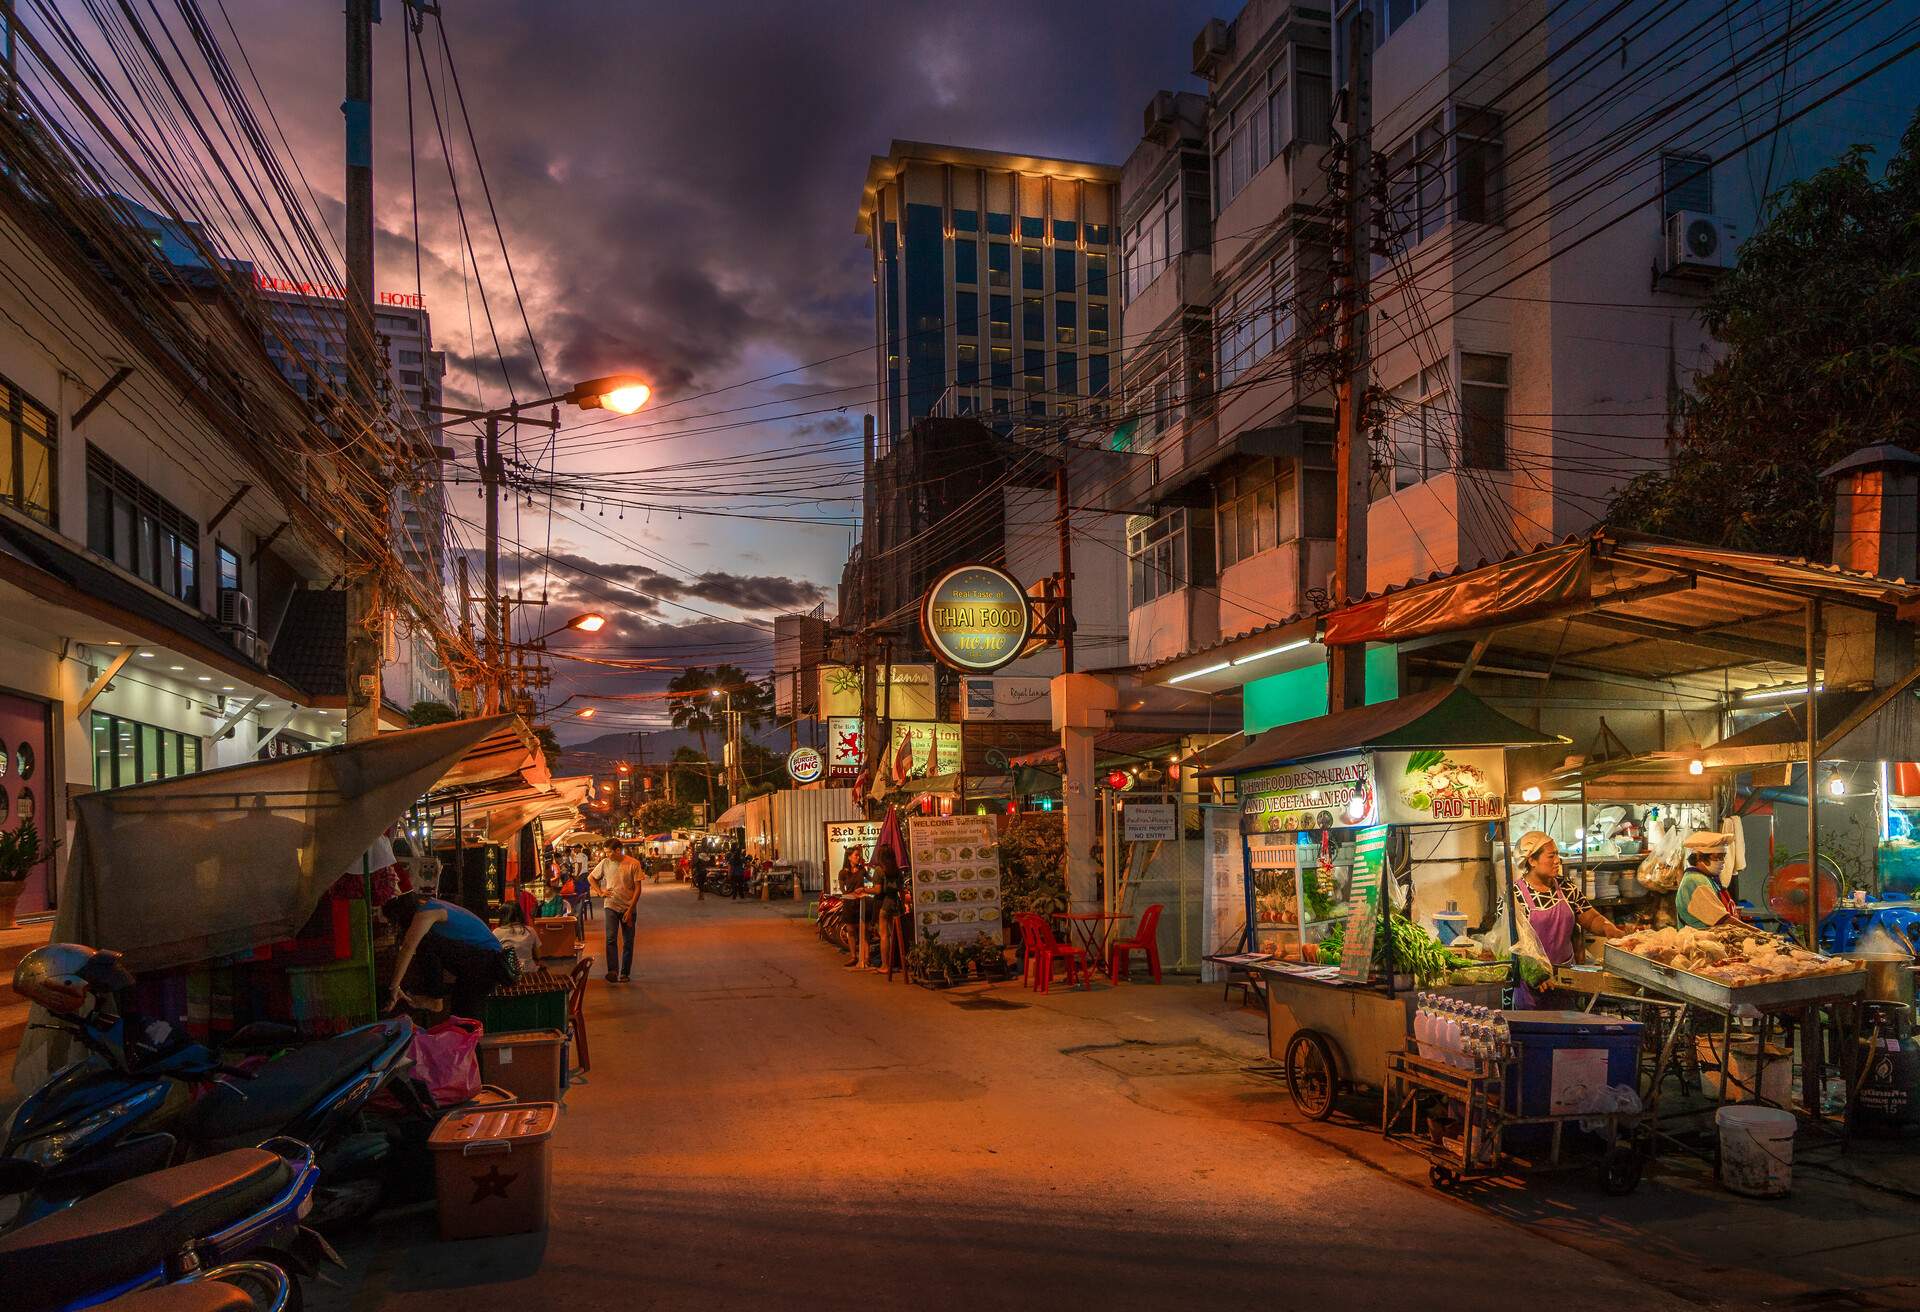 DEST_THAILAND_CHIANG-MAI_STREET_GettyImages-652567910